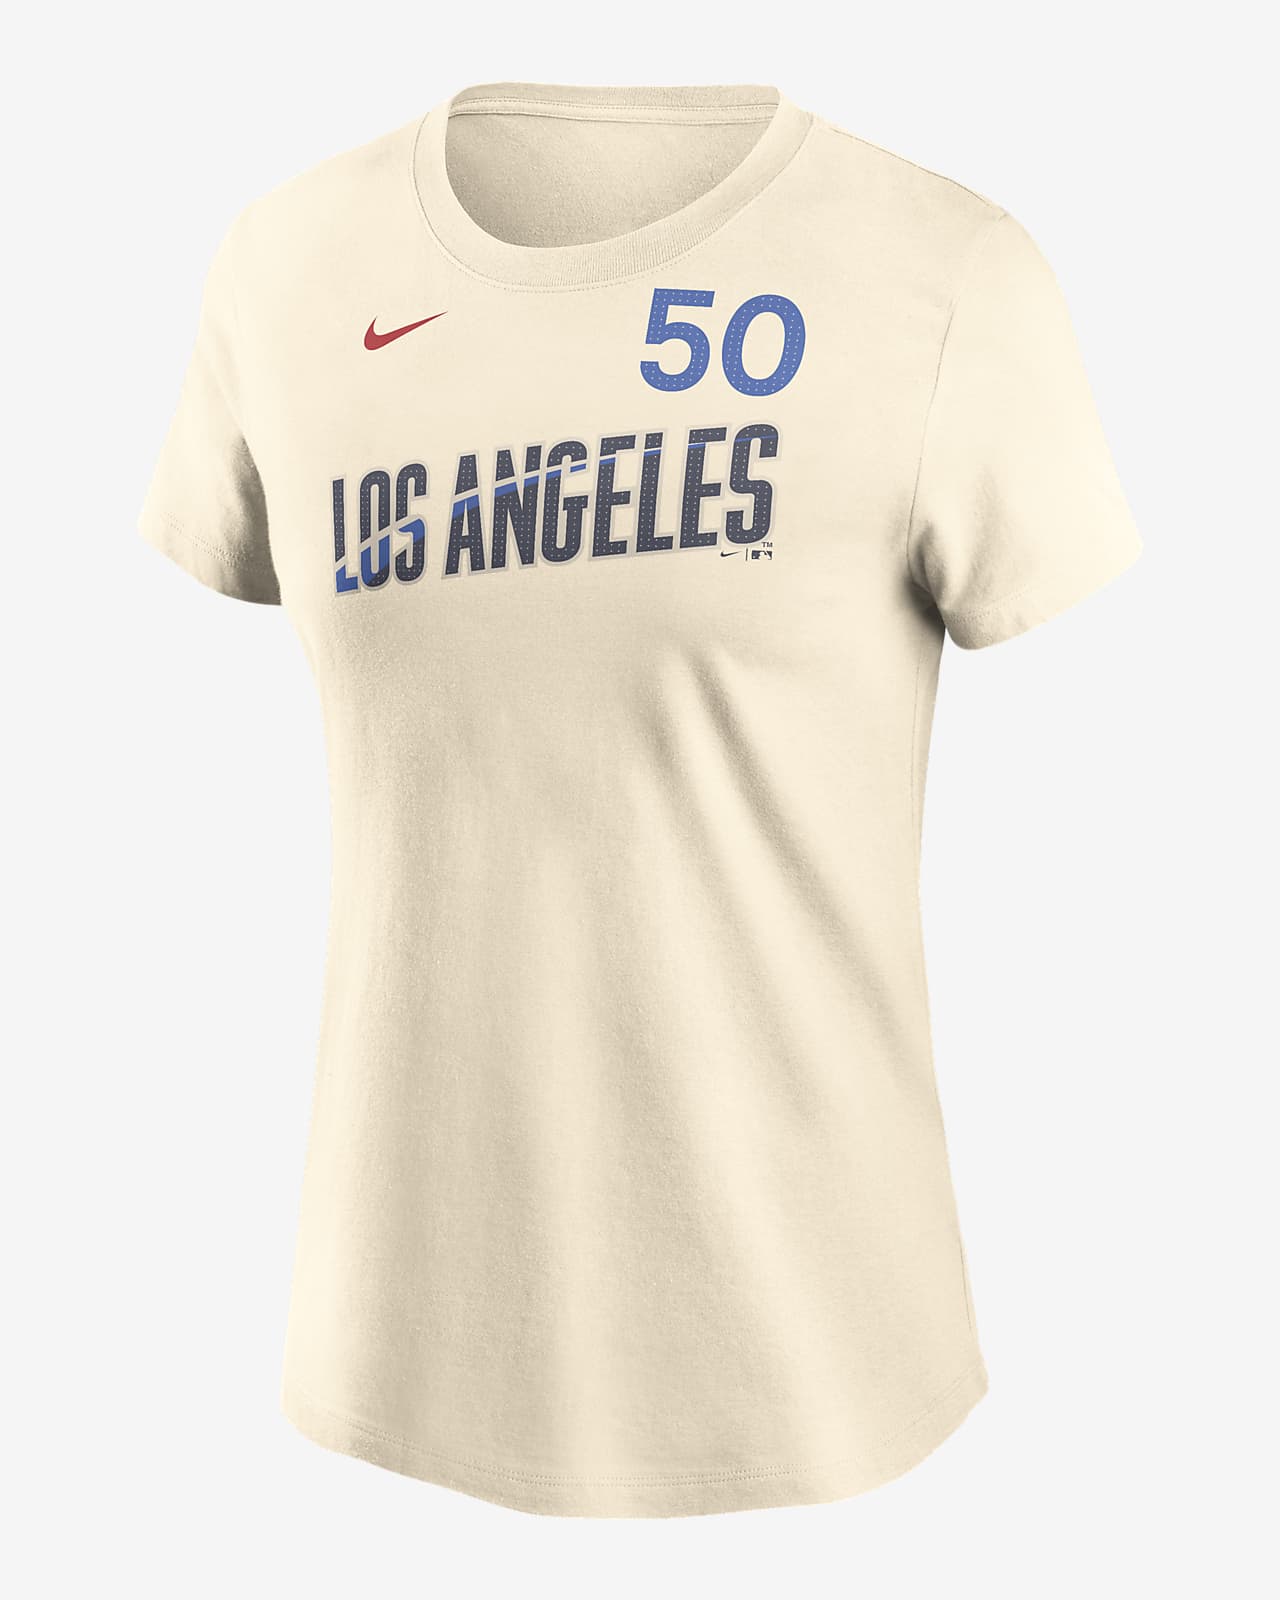 Mookie Betts Los Angeles Dodgers City Connect Fuse Women's Nike MLB T-Shirt